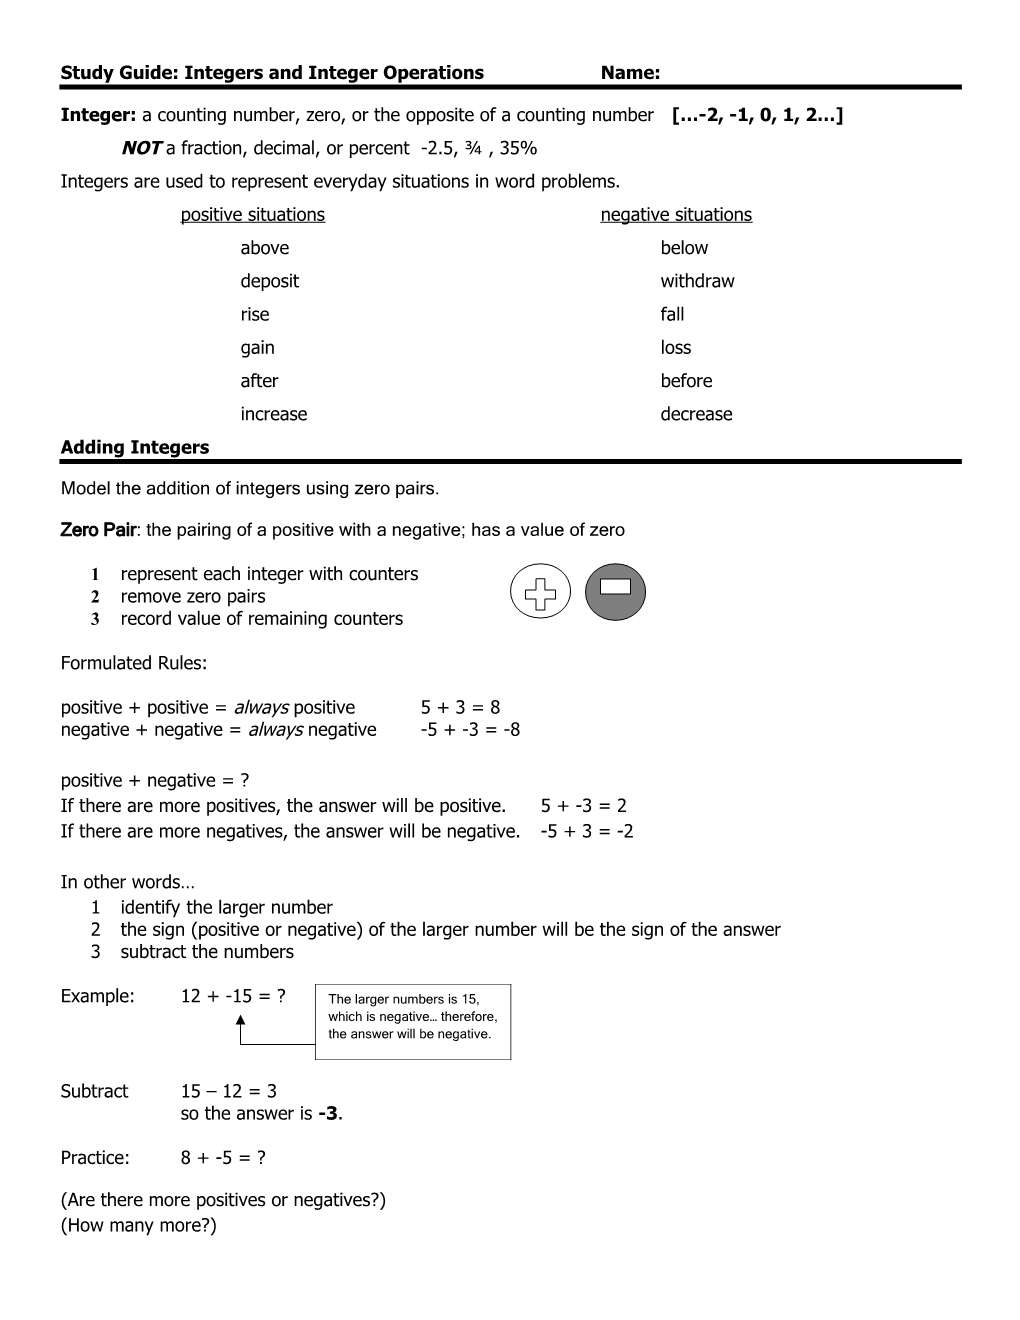 Study Guide: Integers and Integer Operations